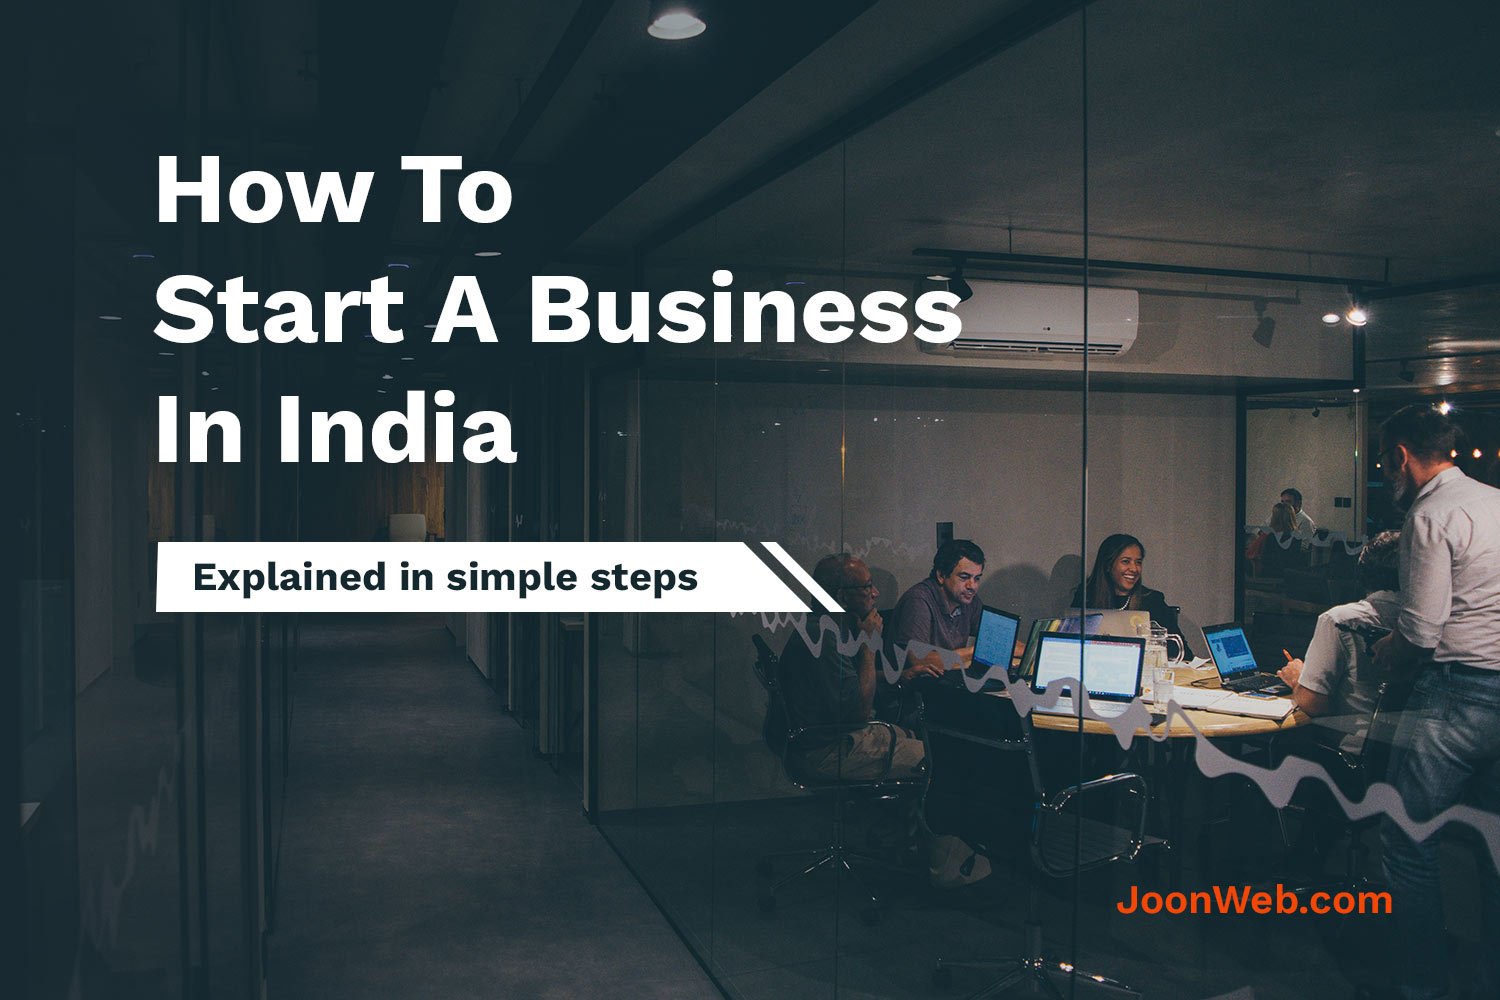 How To Start A Business In India 2022: Detailed Explanation Image